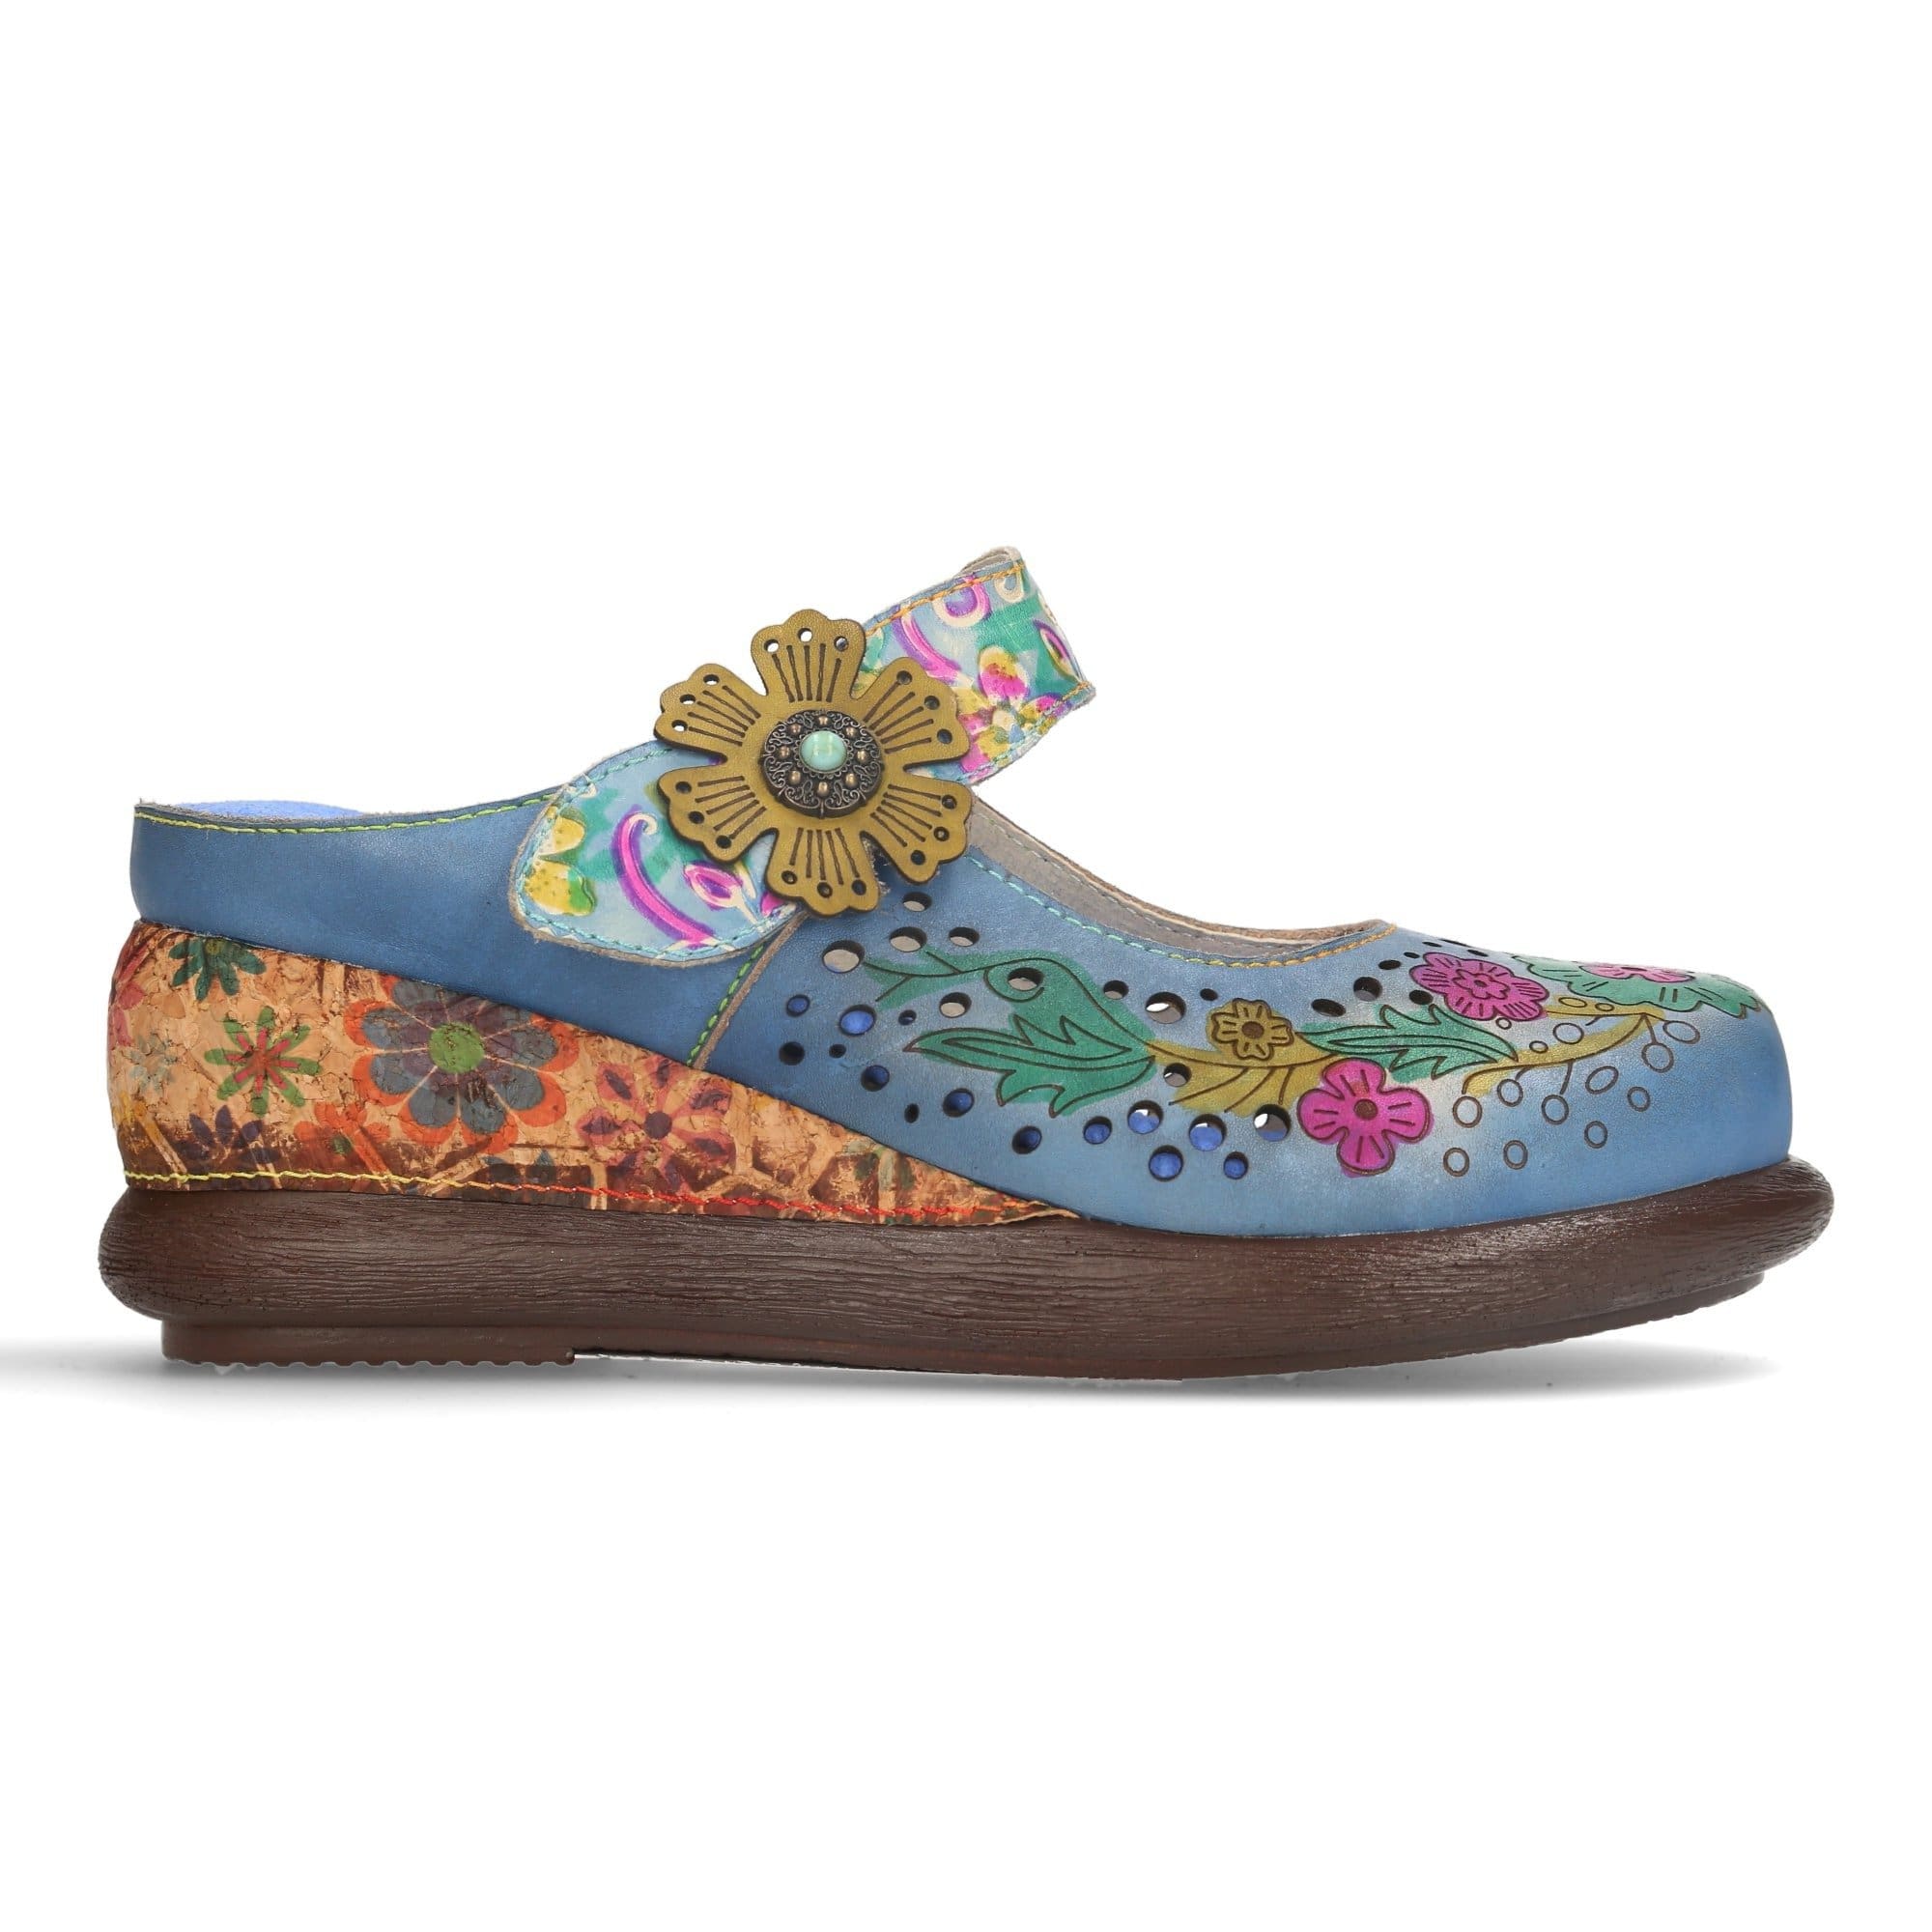 Chaussures JACSONO 04 - 35 / Turquoise - Mule